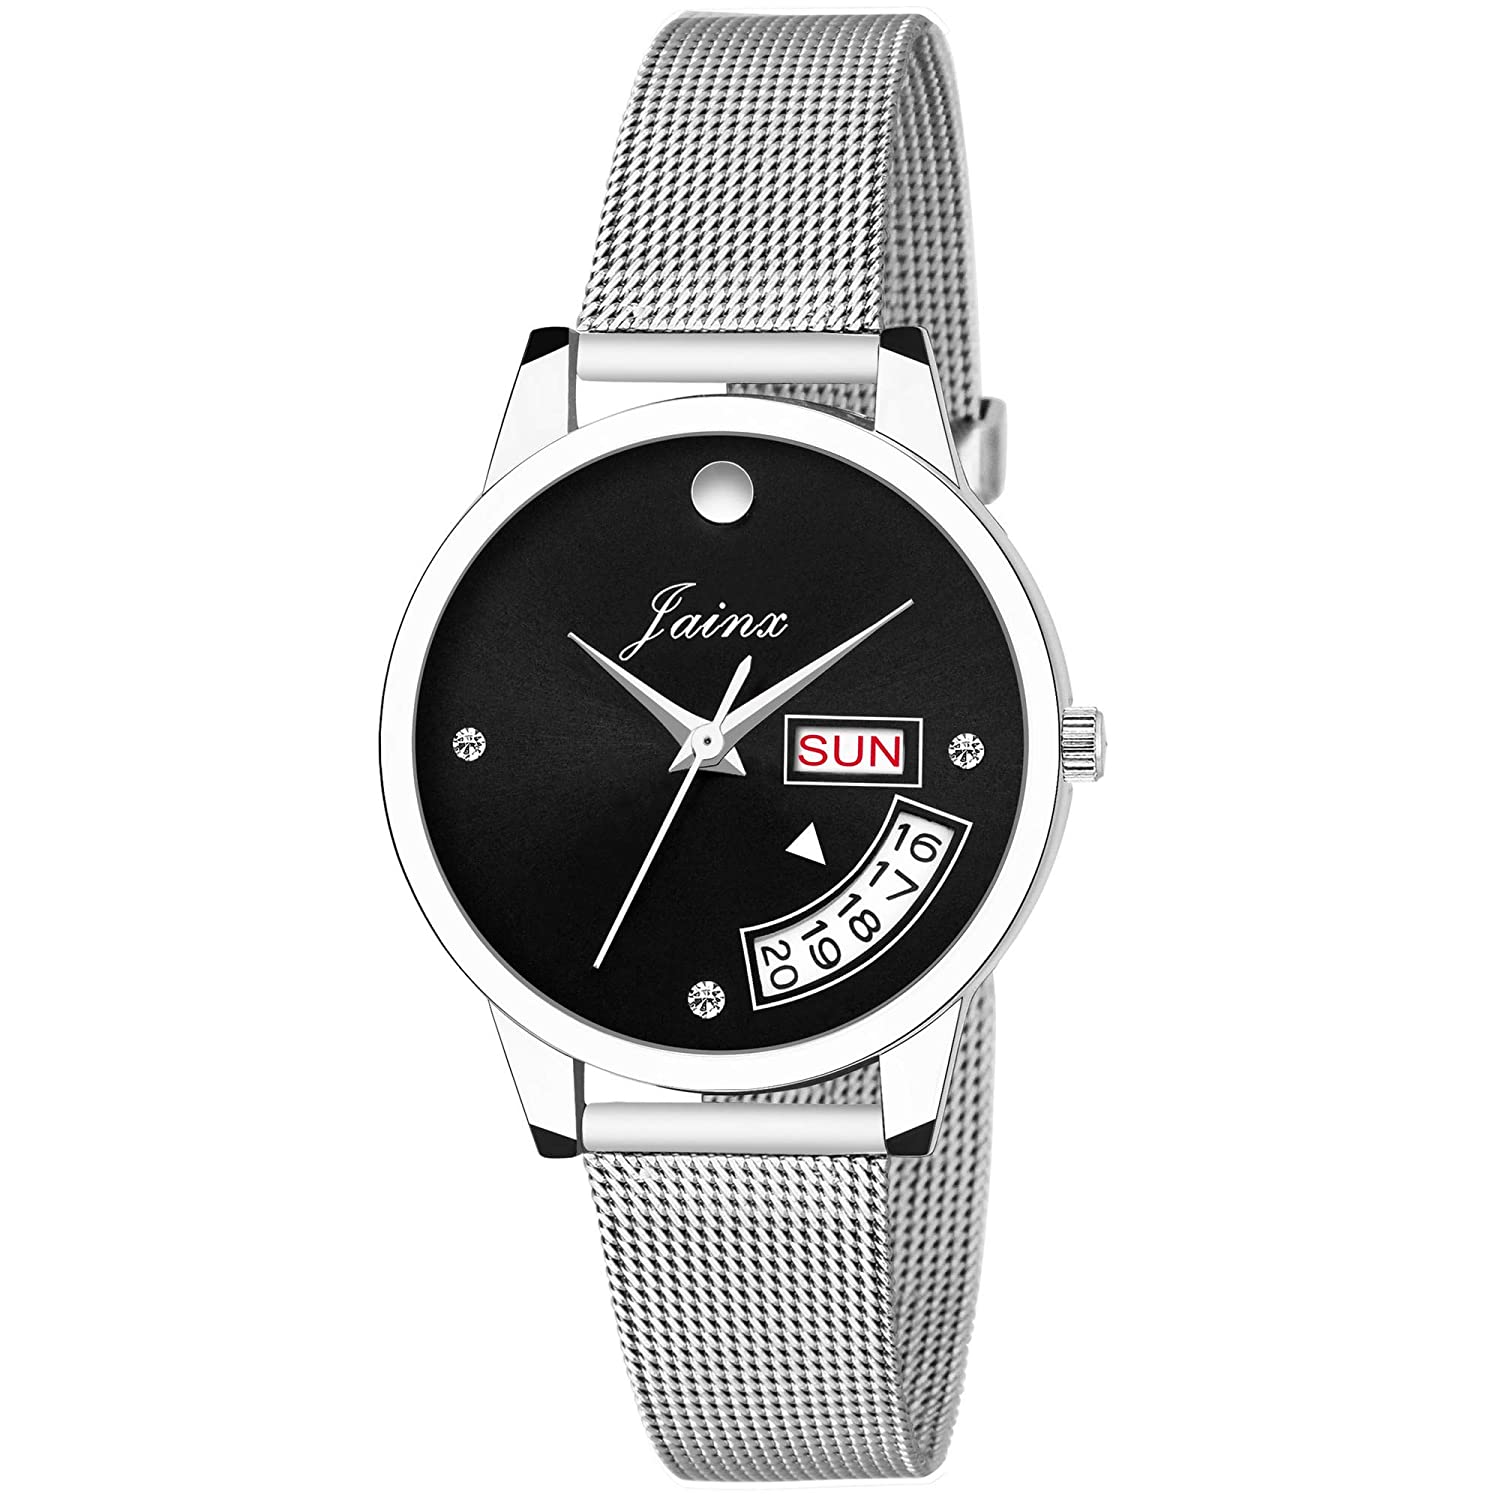 Black Day & Date Function Dial Steel Mesh Chain Analog Watch - For Women JW598 - Jainx Store